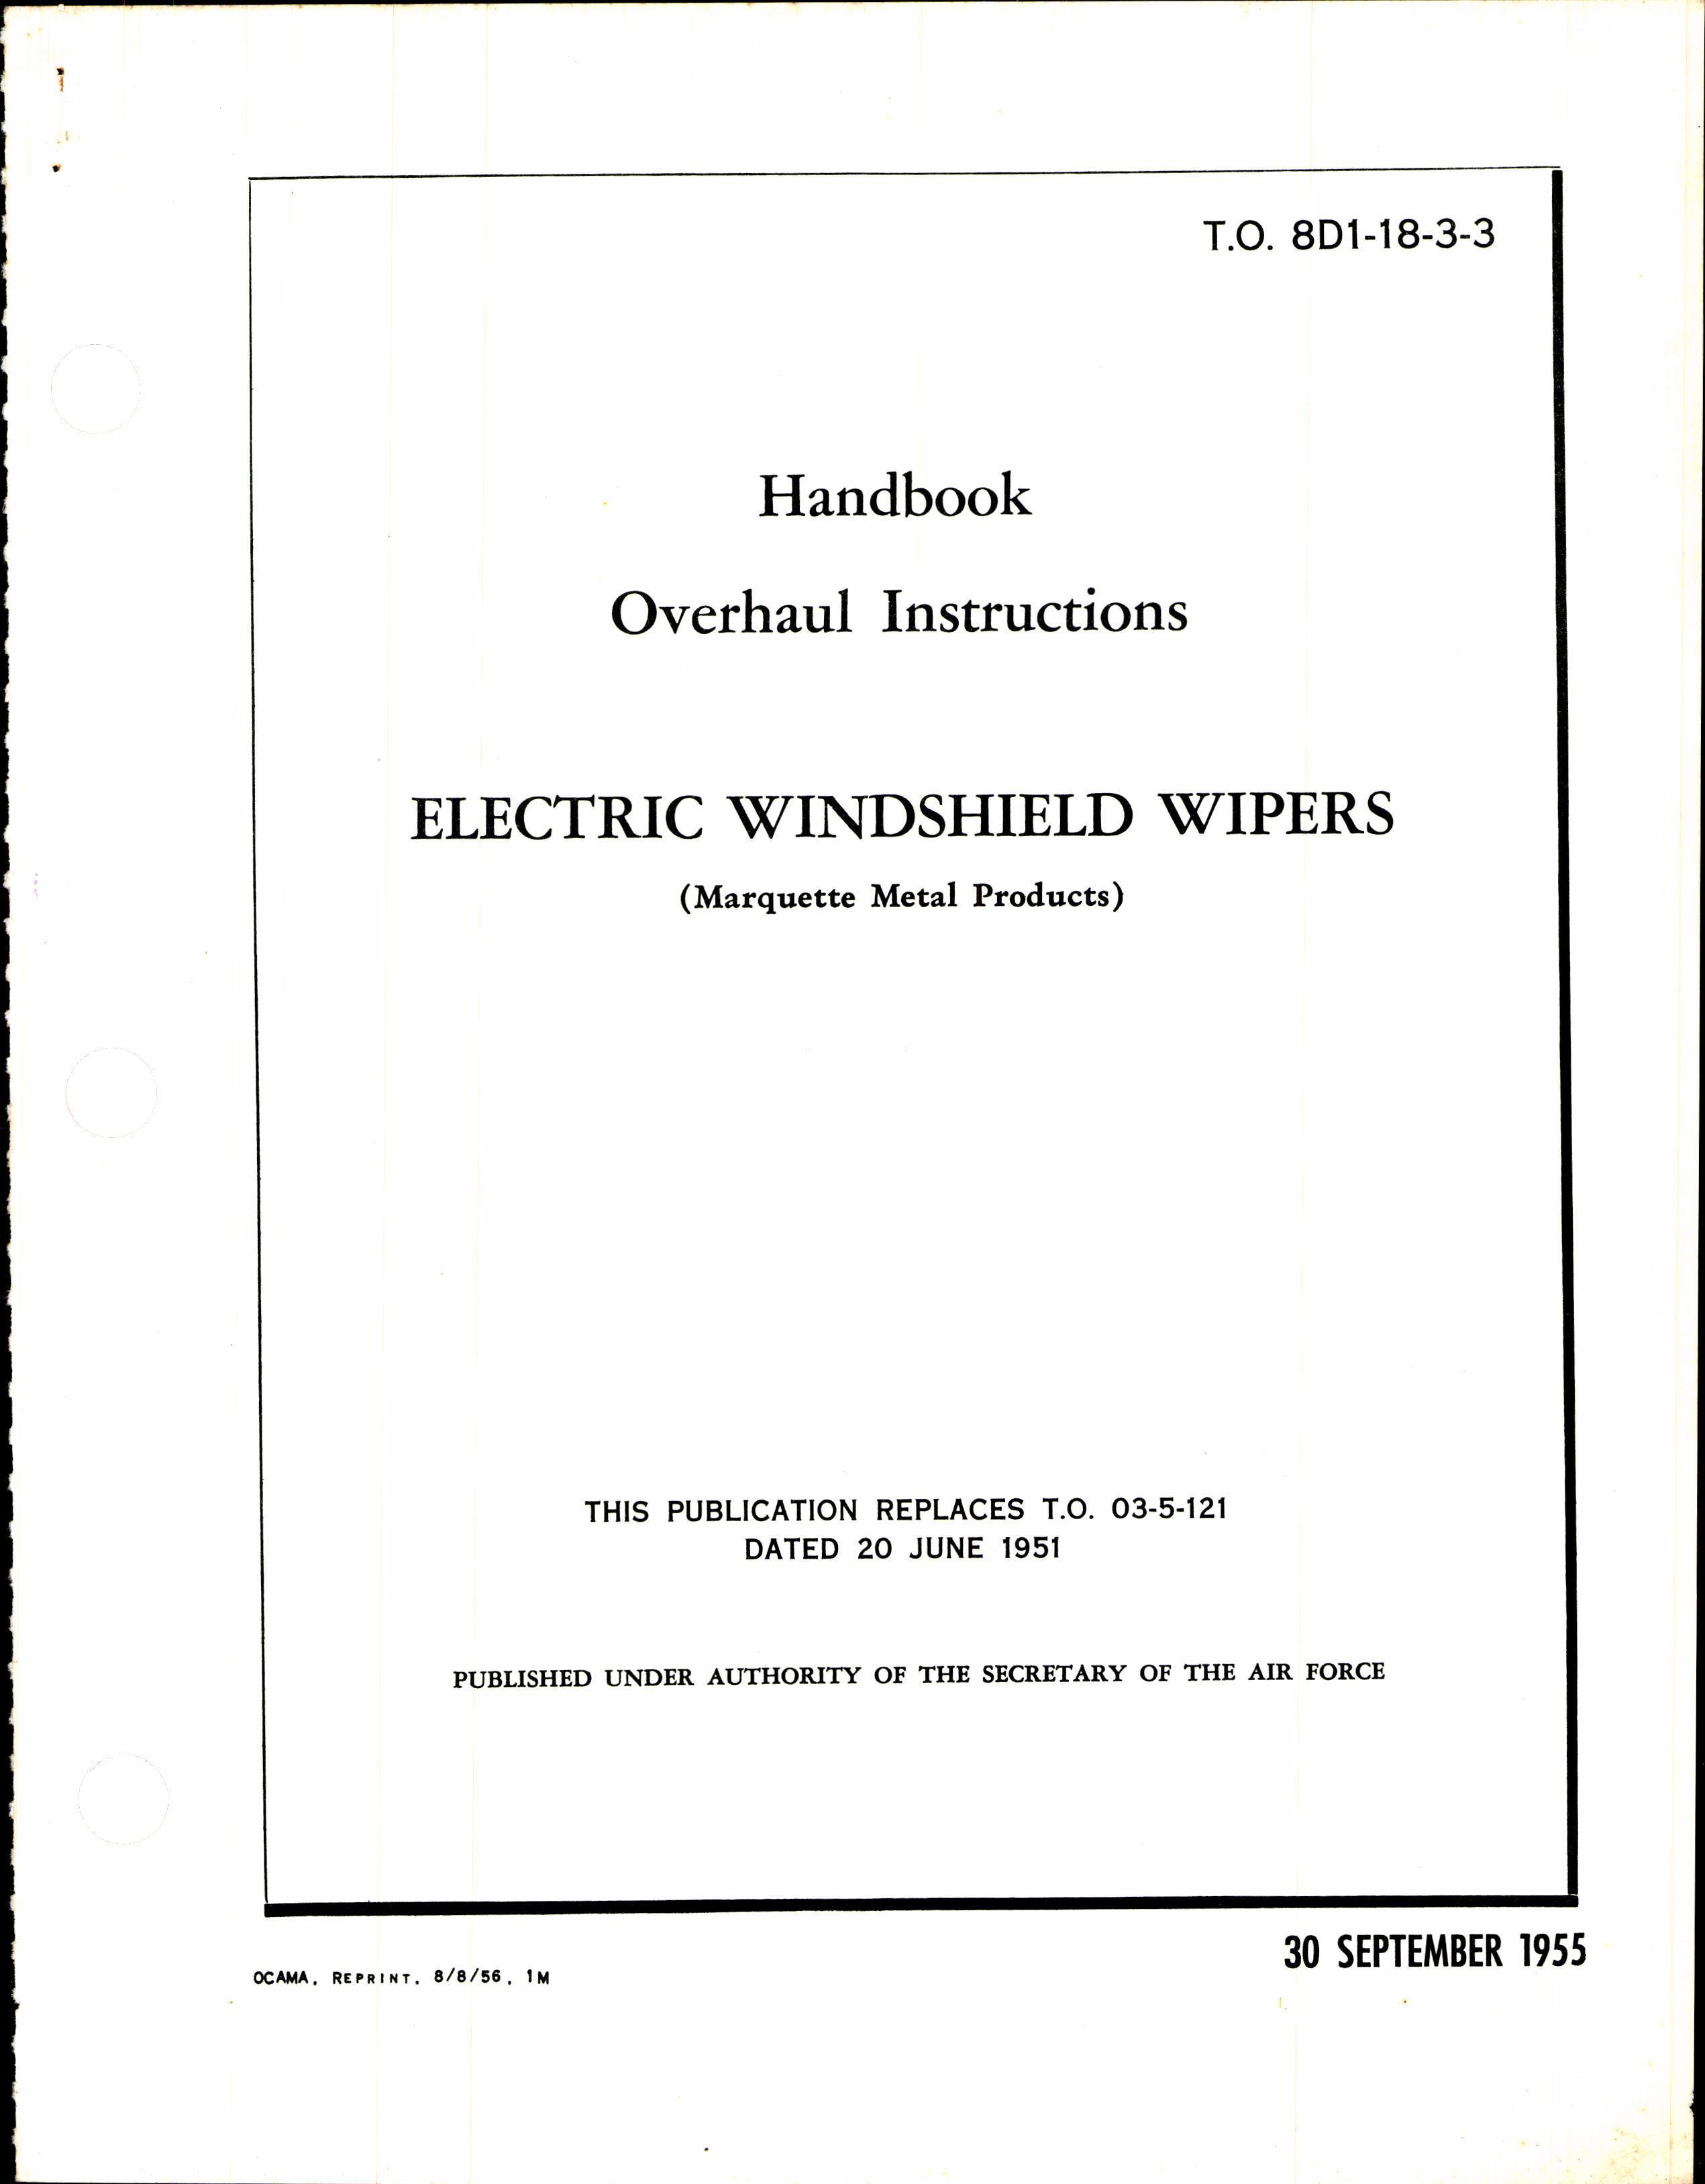 Sample page 1 from AirCorps Library document: Overhaul Instructions for Electric Windshield Wipers